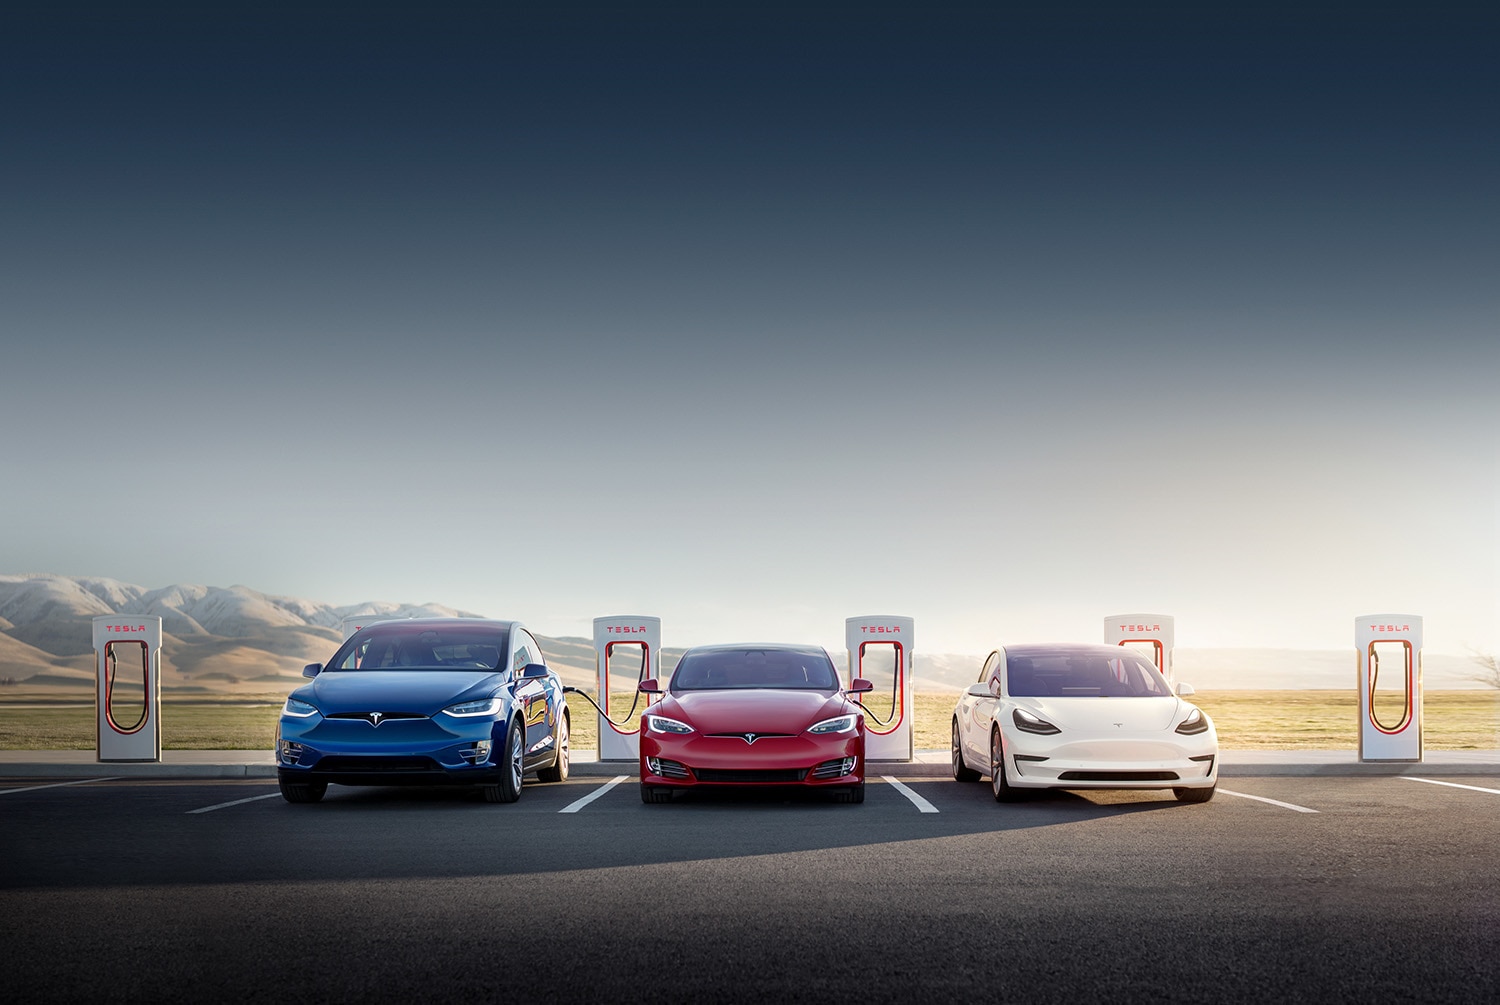 Three Teslas in red blue and white charging